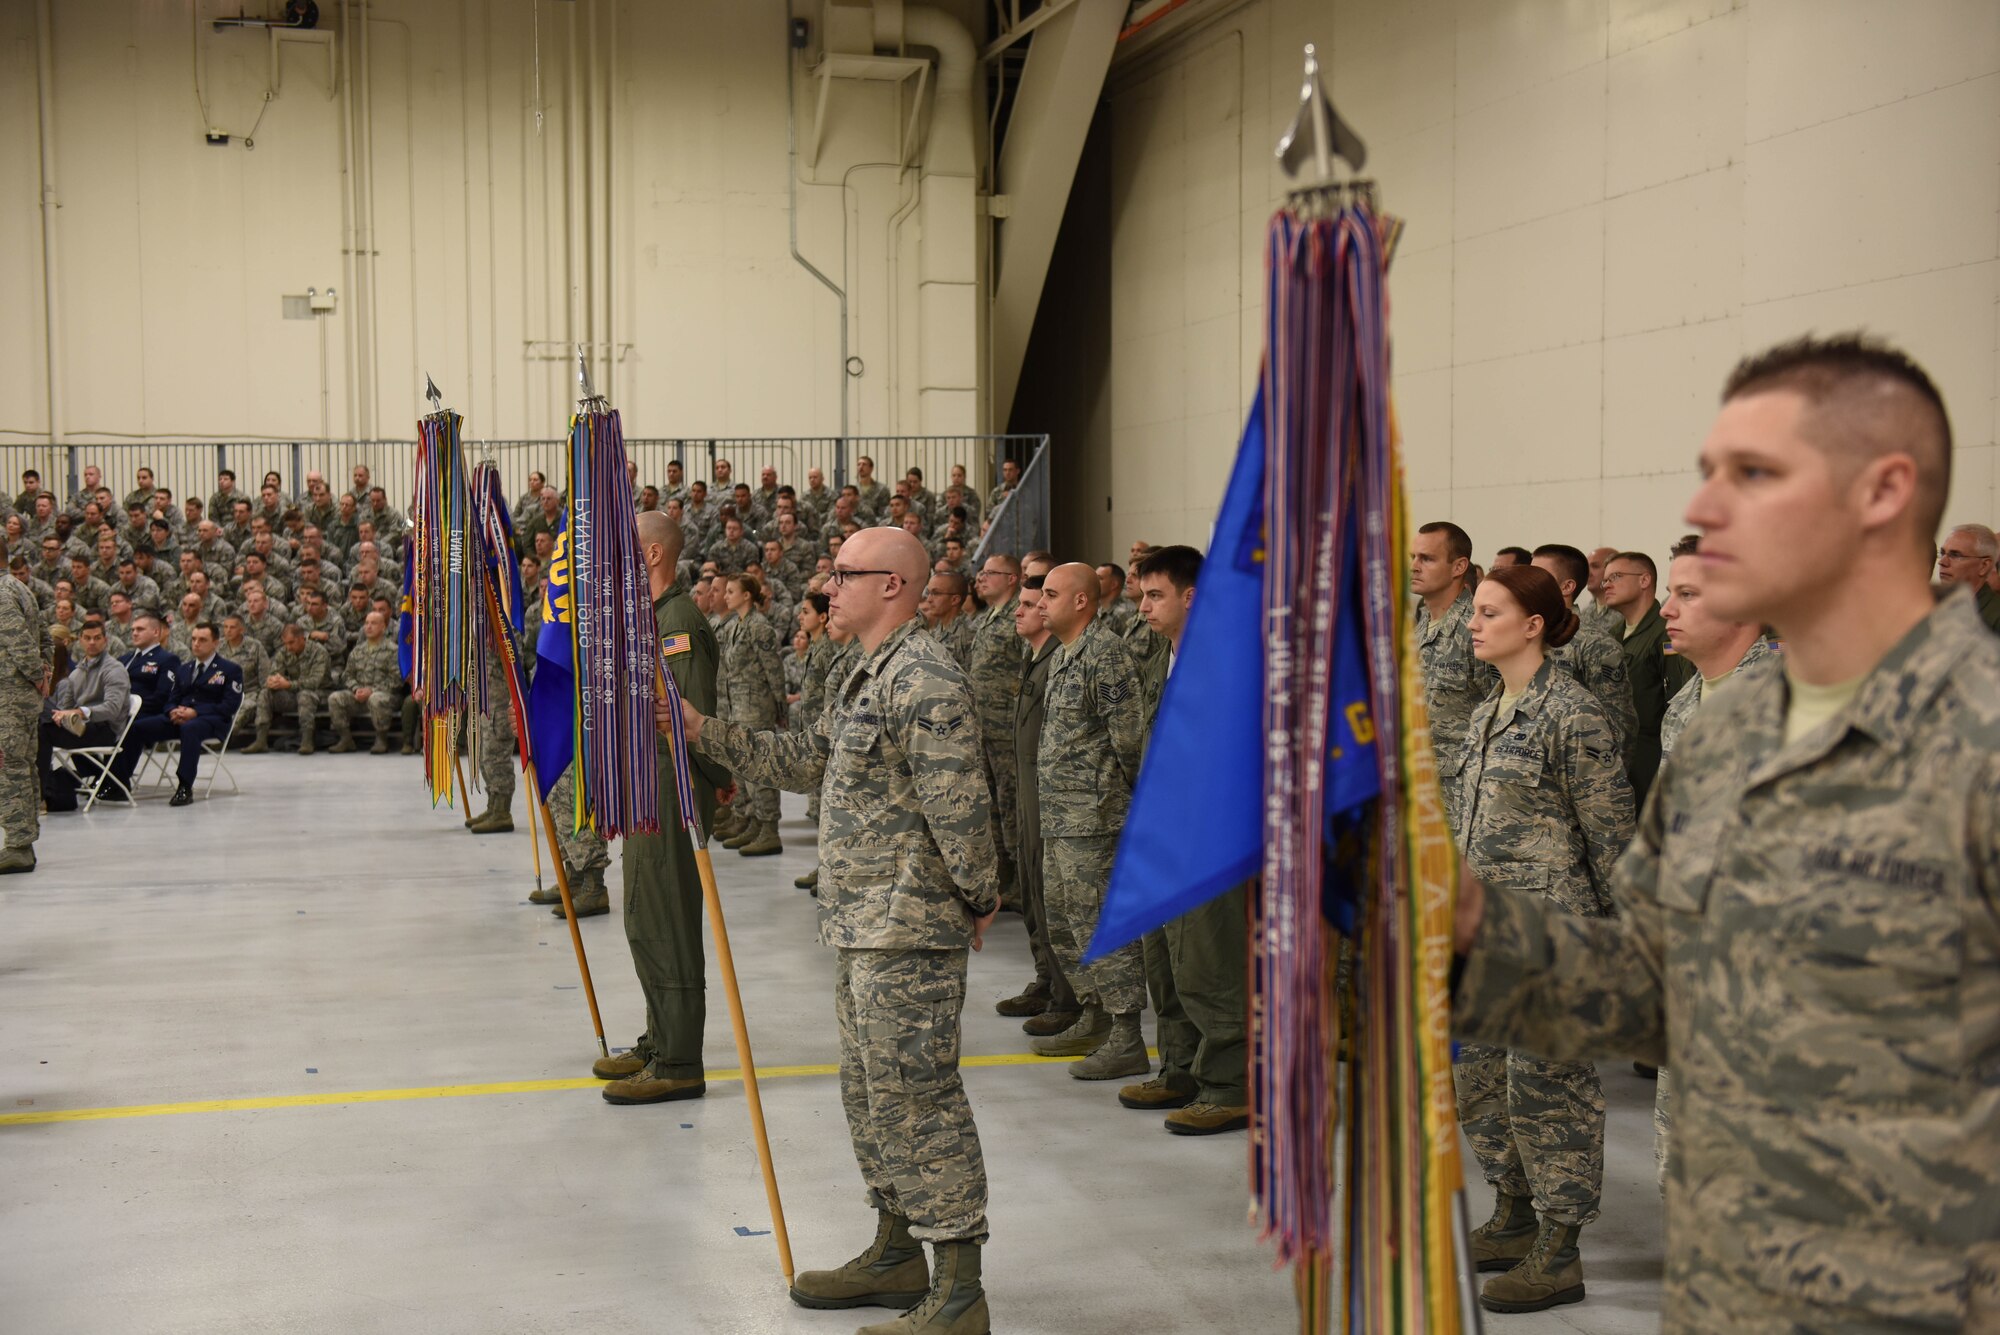 Airmen of the 193rd Special Operations Wing, Middletown, Pa., stand in formation during a change-of-command ceremony on base Nov. 14. Col. Benjamin (Mike) Cason took charge of the wing during the event and is now the first dual-status Airman to lead an Air Force Special Operations Command unit. Cason is tasked with the training and readiness of the wing's approximately 1,900 Airmen. (U.S. Air National Guard photo by Senior Airman Ethan Carl/Released)